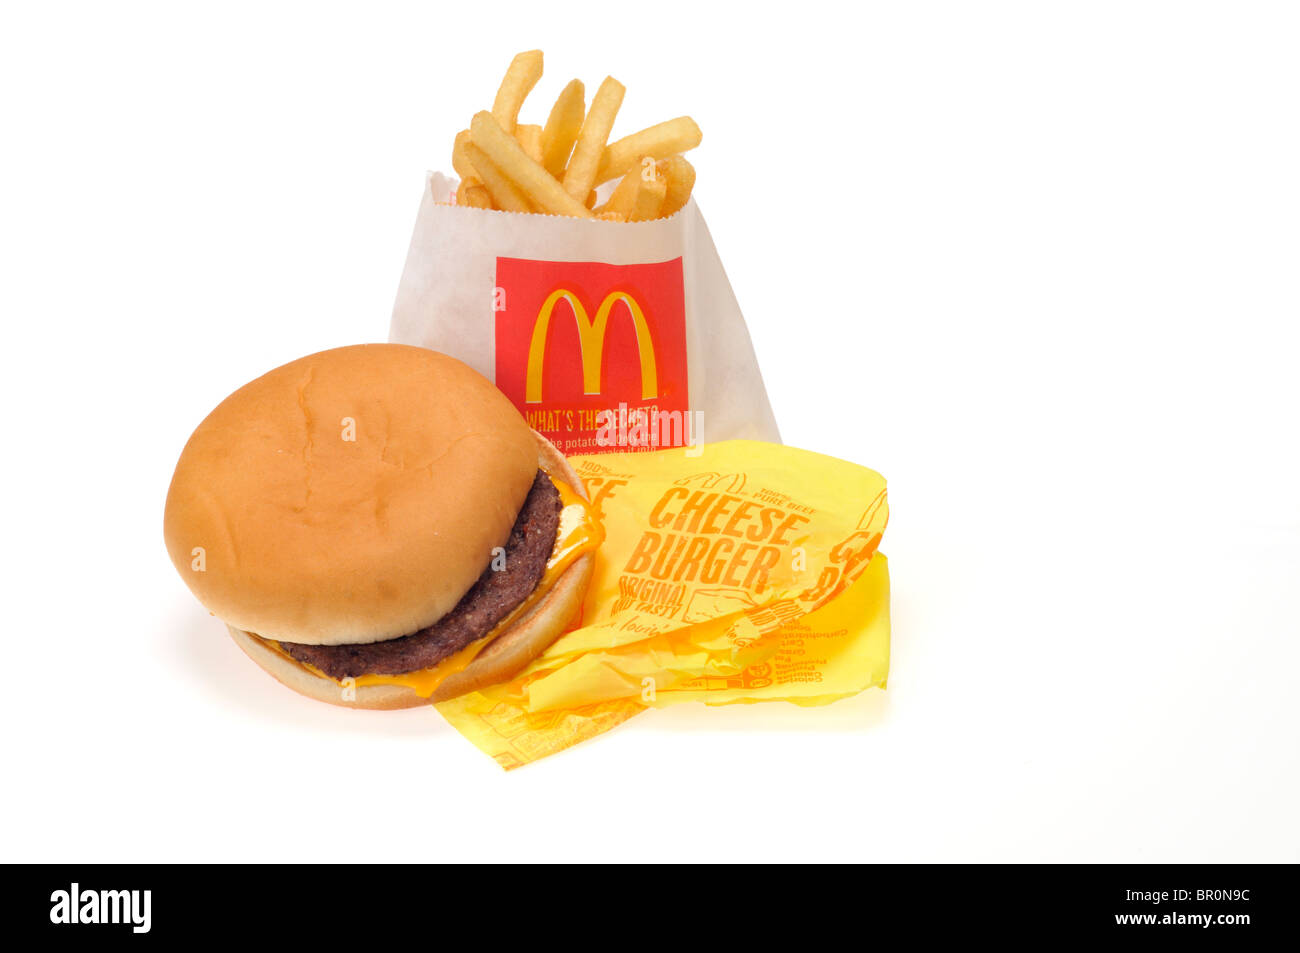 McDonald's cheeseburger and french fries on white background cutout. Stock Photo